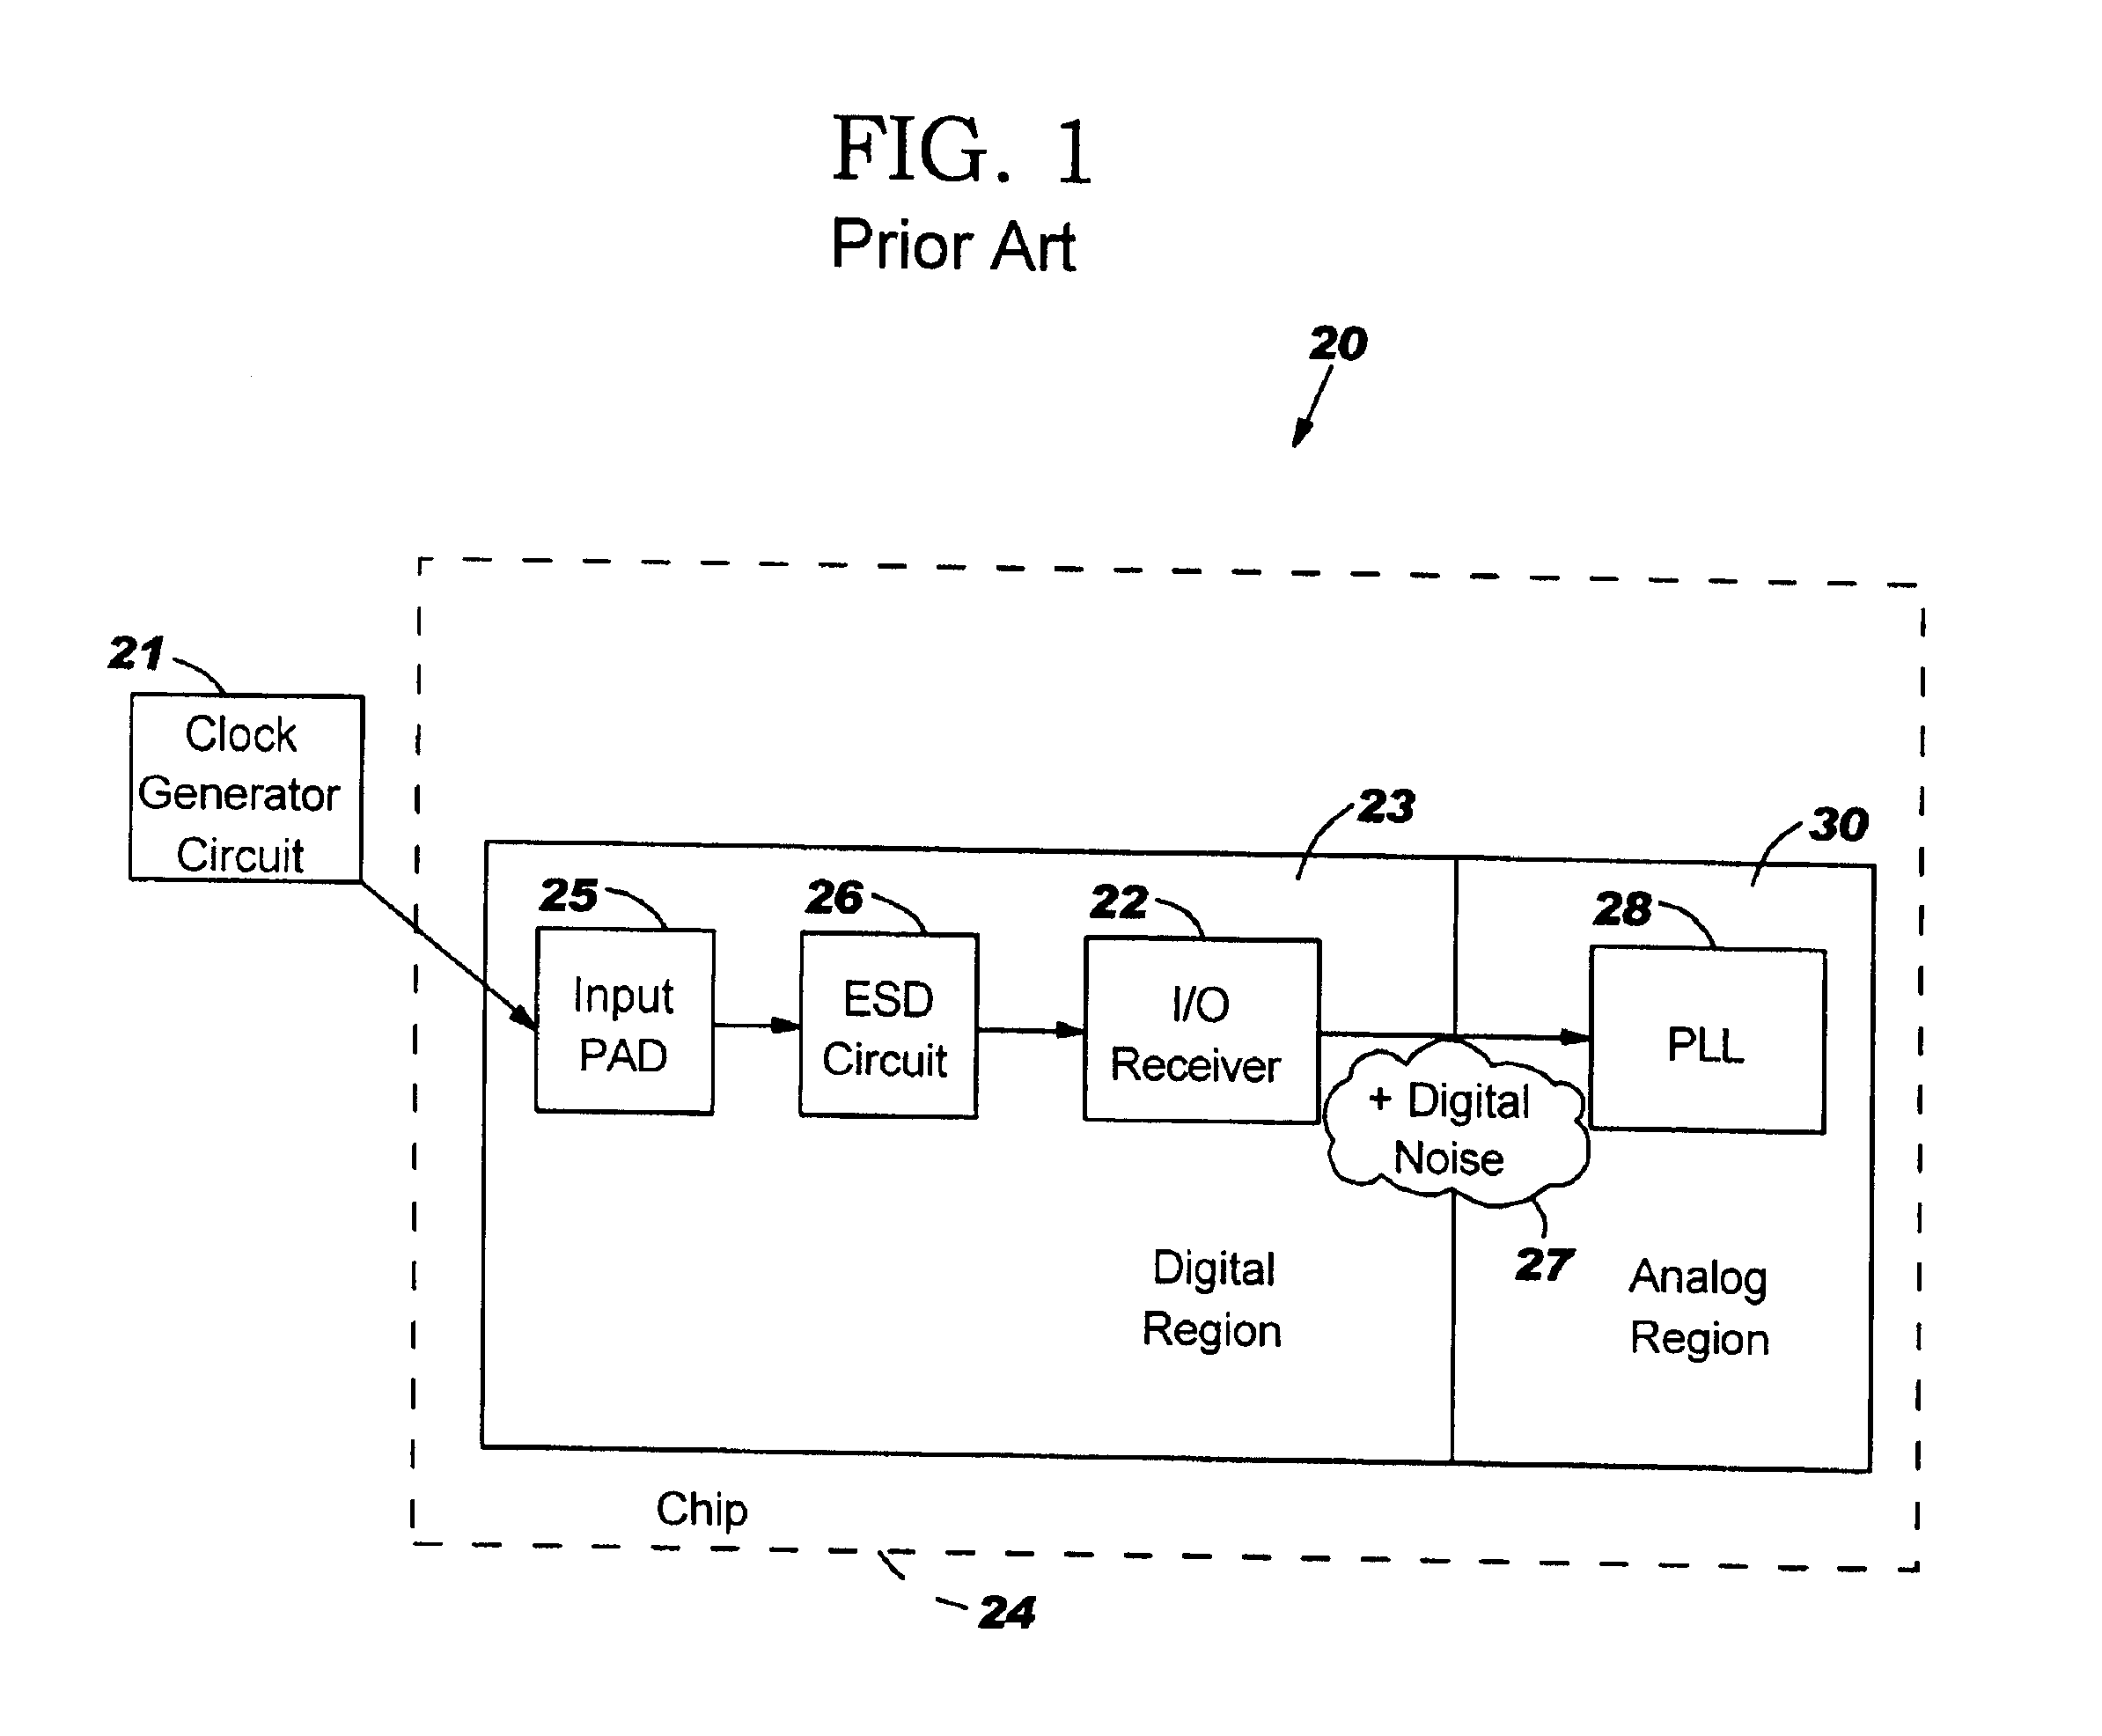 Integrated circuit and method for interfacing two voltage domains using a transformer